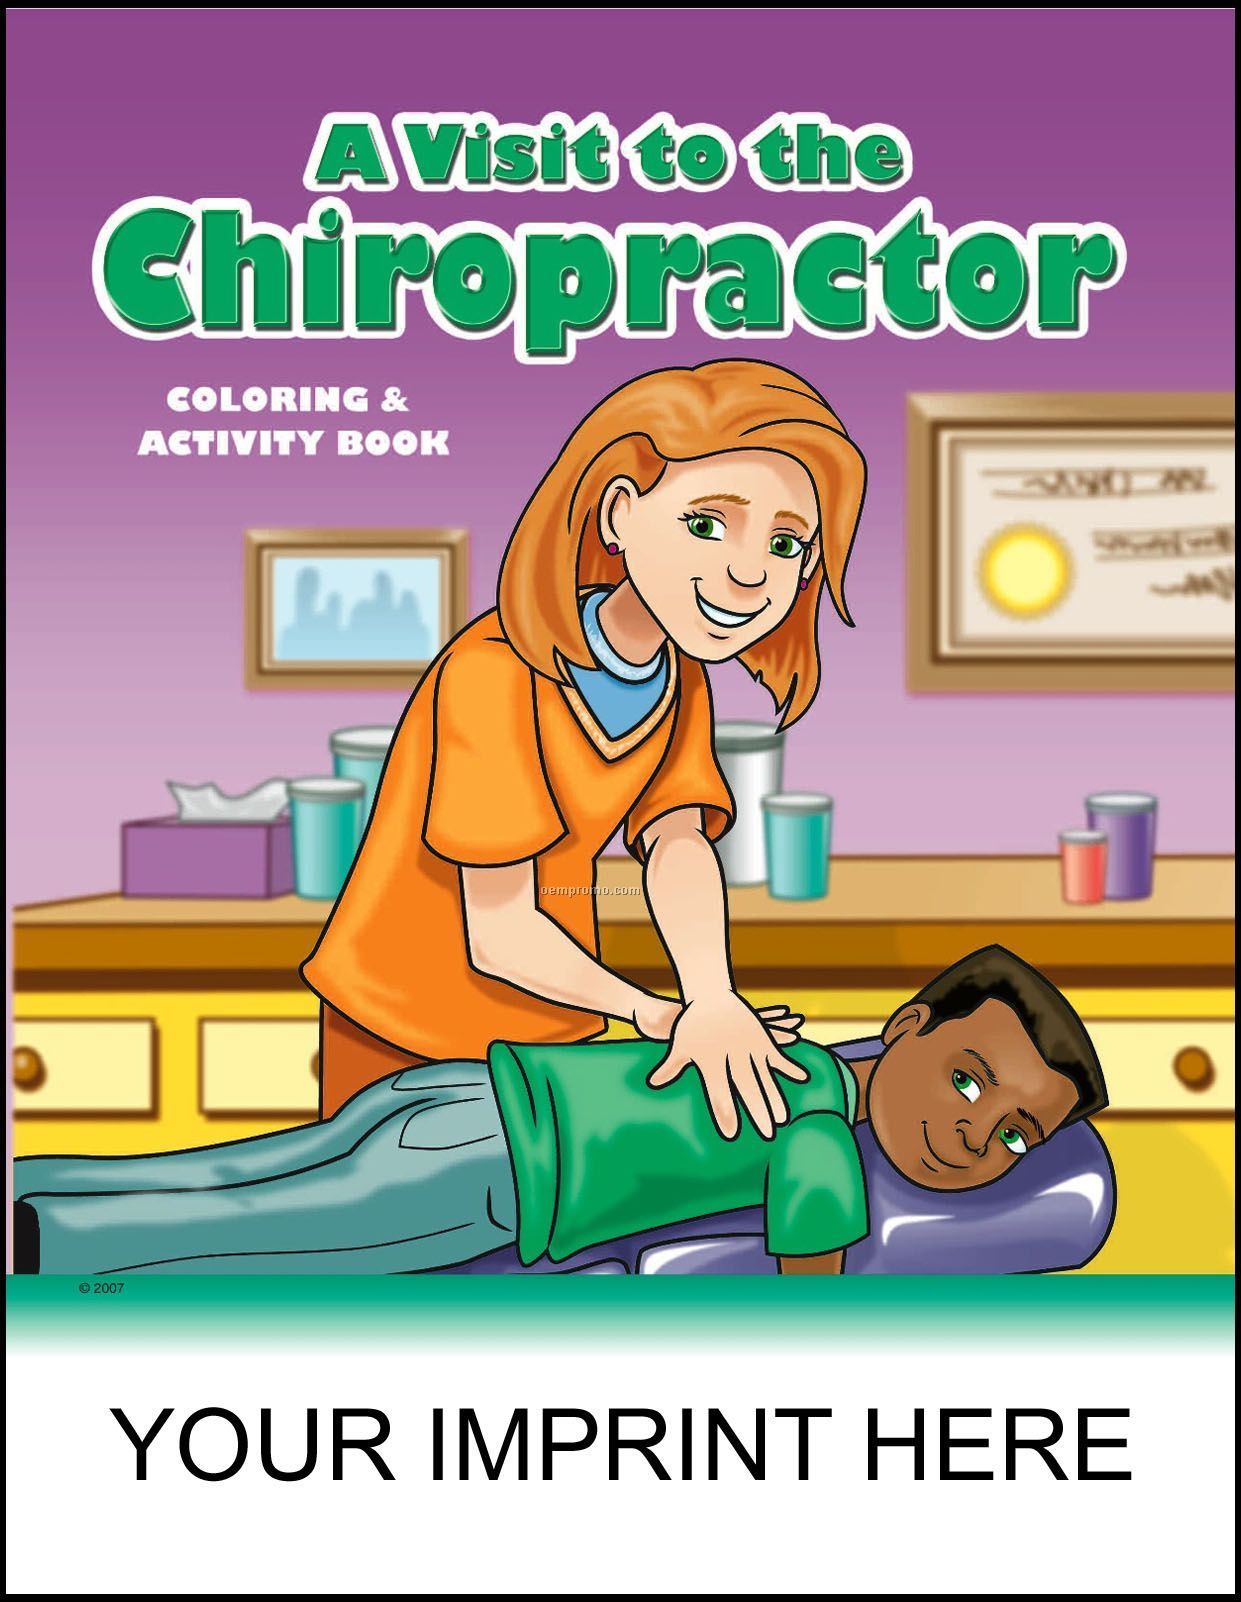 A Visit To The Chiropractor Coloring & Activity Book